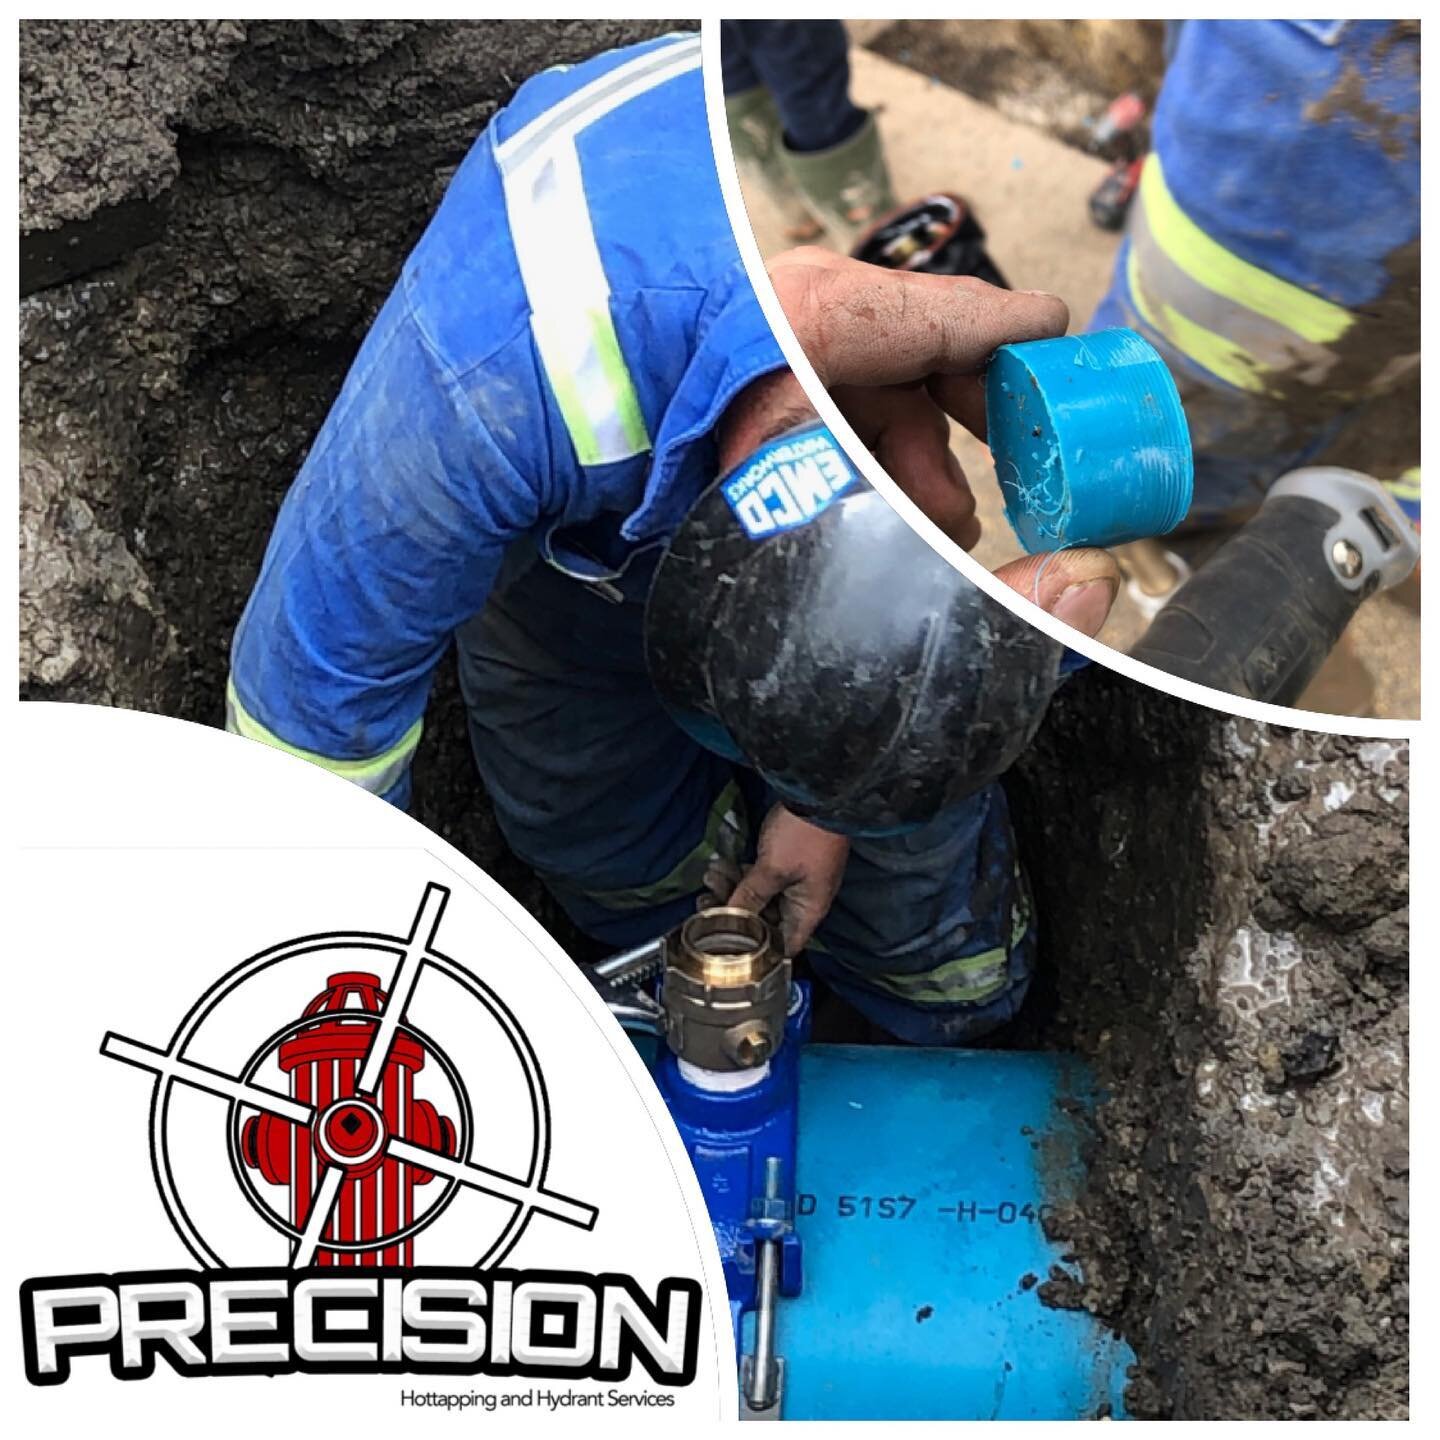 Even the smallest of taps can be super deep! Our professionals can deal with any size and material hassle free. 

#hottapping #plumbing #construction #trucks #hydrant #fyp #yyc #alberta #f4f #work #britishcolumbia #saskatchewan